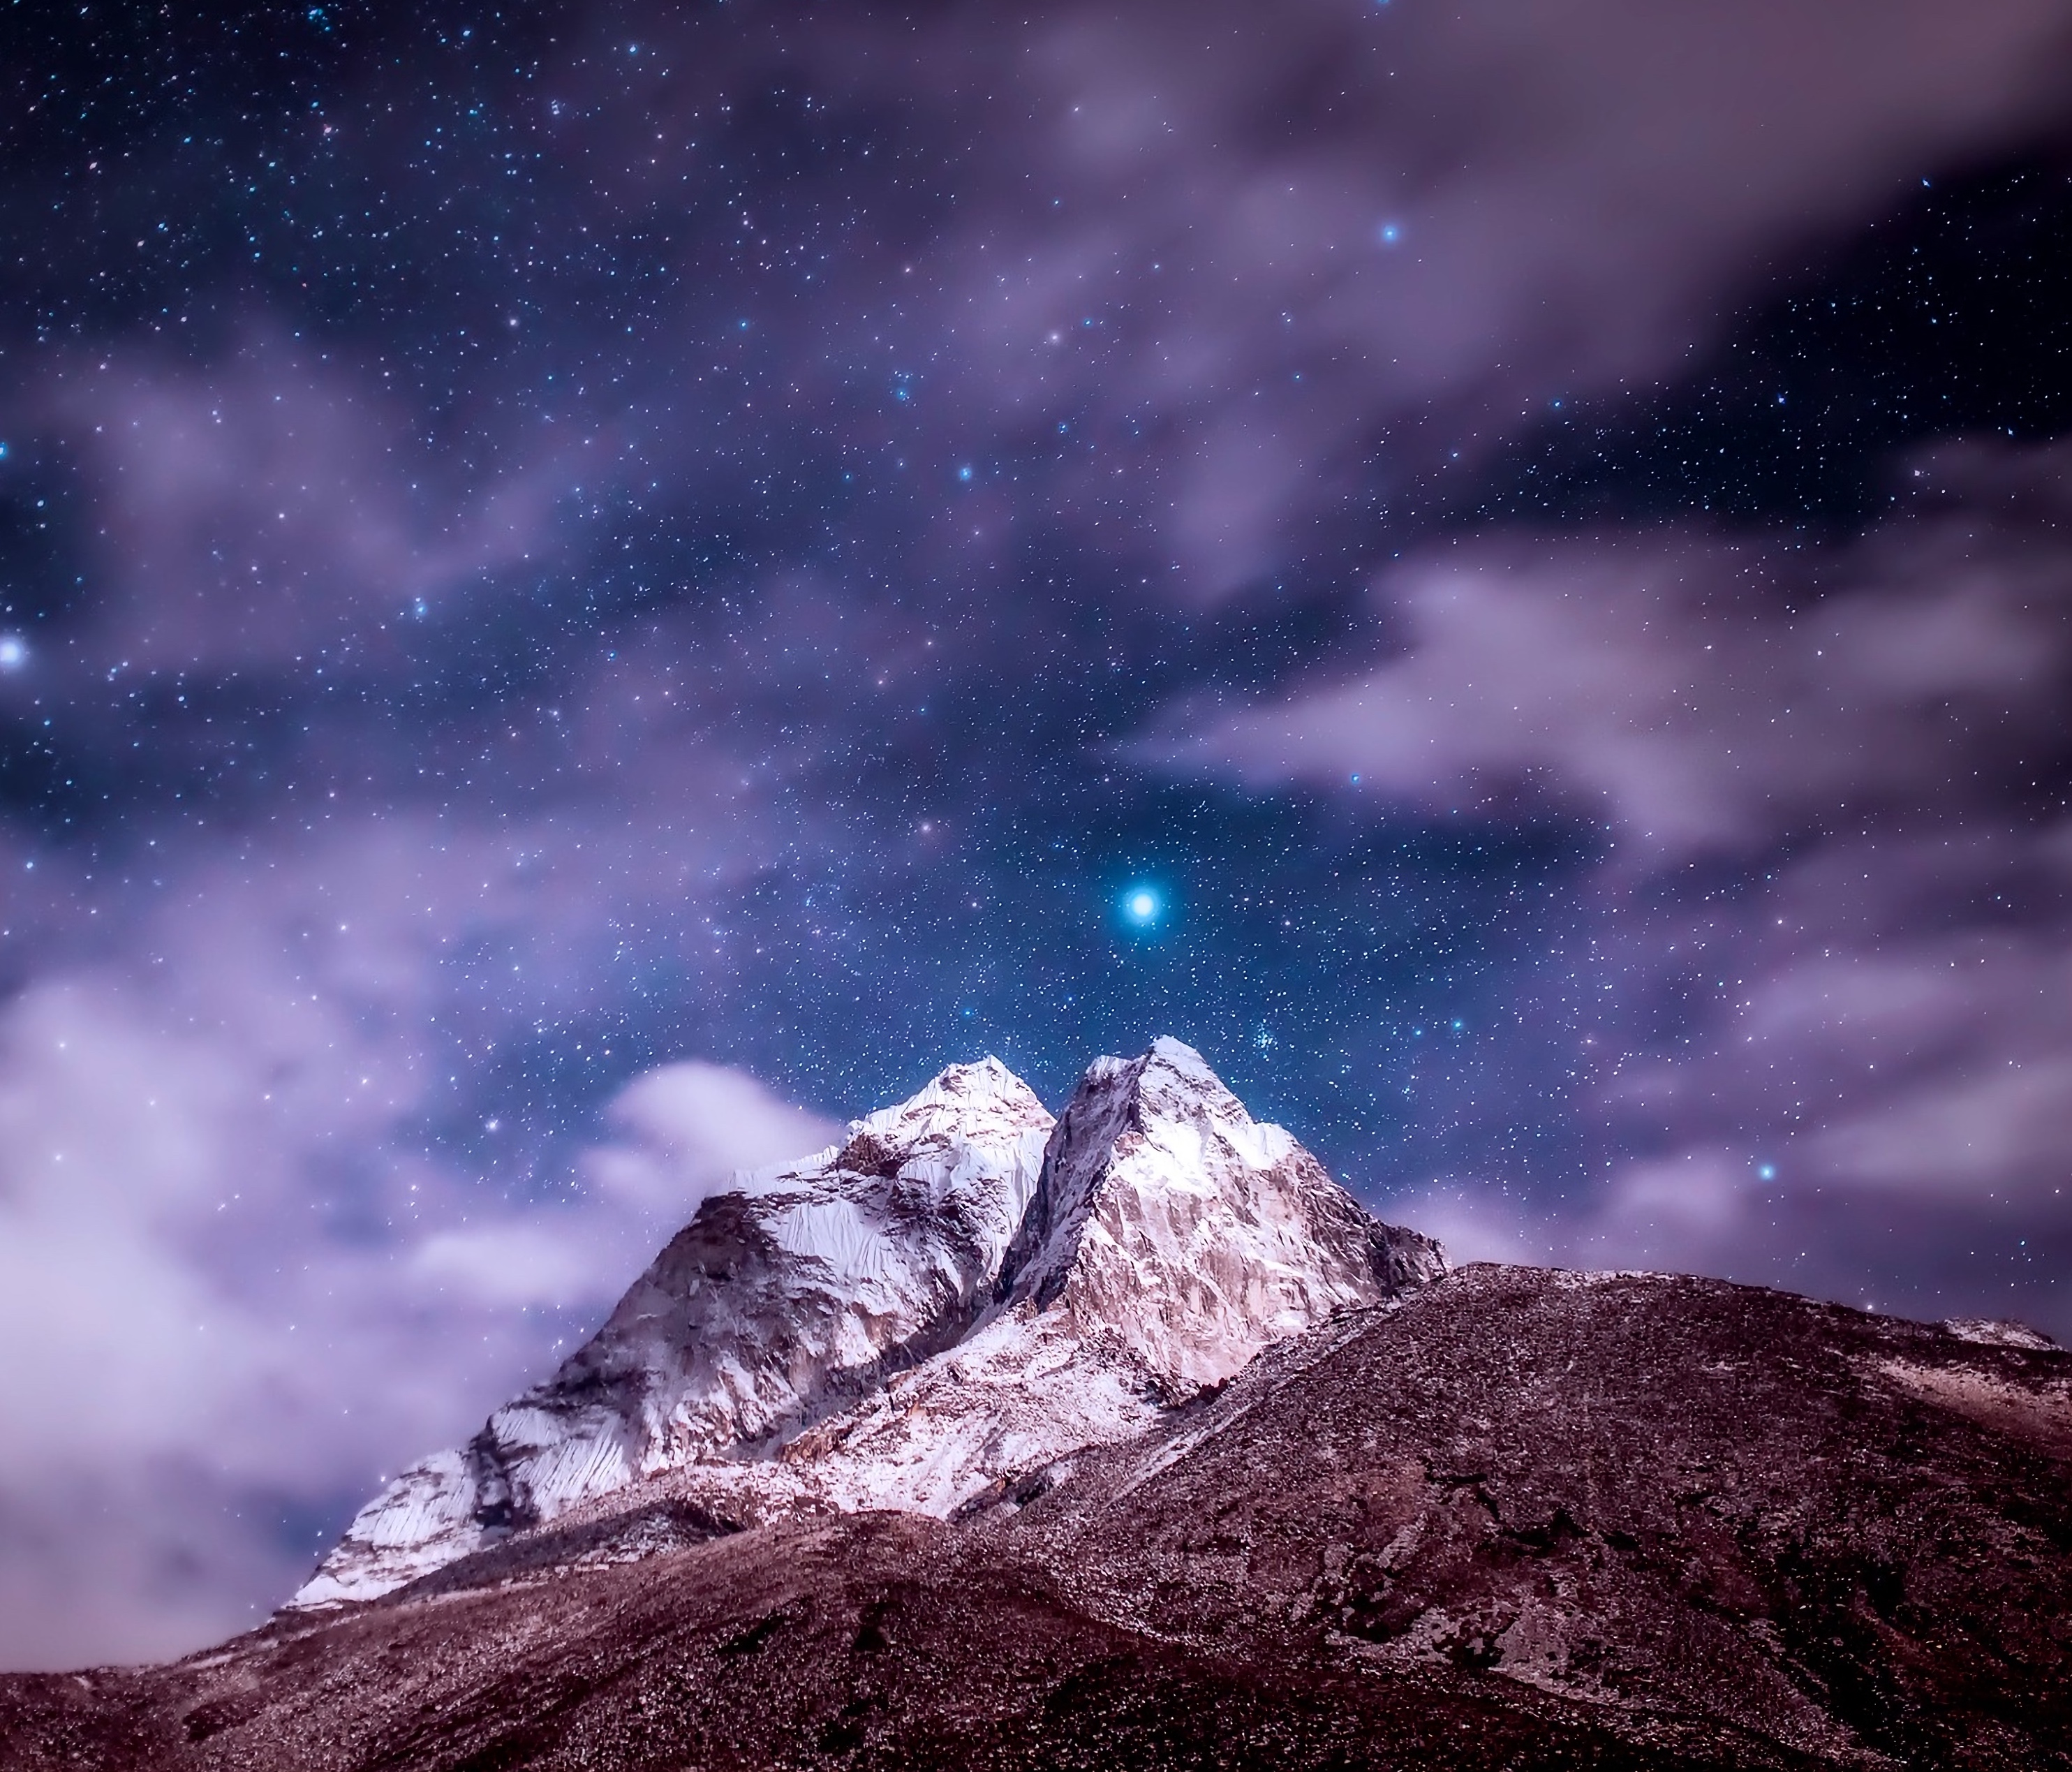 himalayas, starry sky, clouds, nature, snow covered, mountains, vertex, top, snowbound